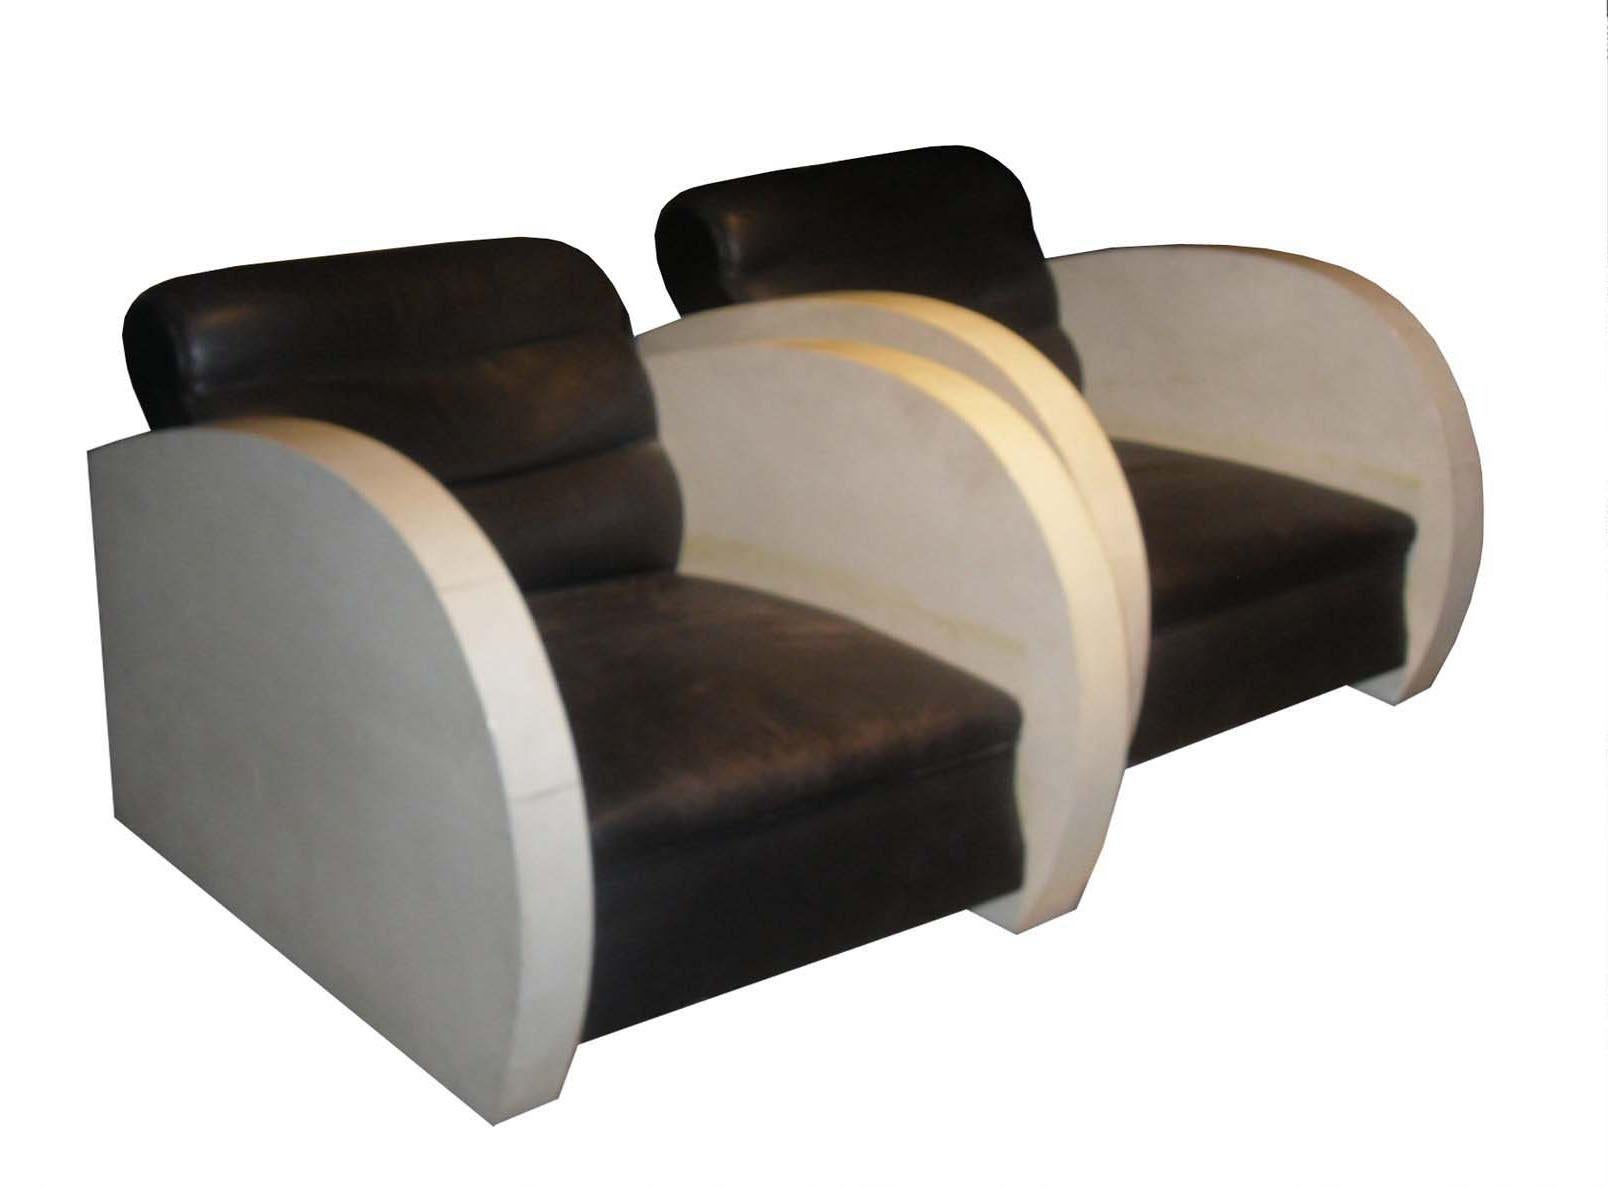 Pair of Art Deco club chairs in parchment and black leather.